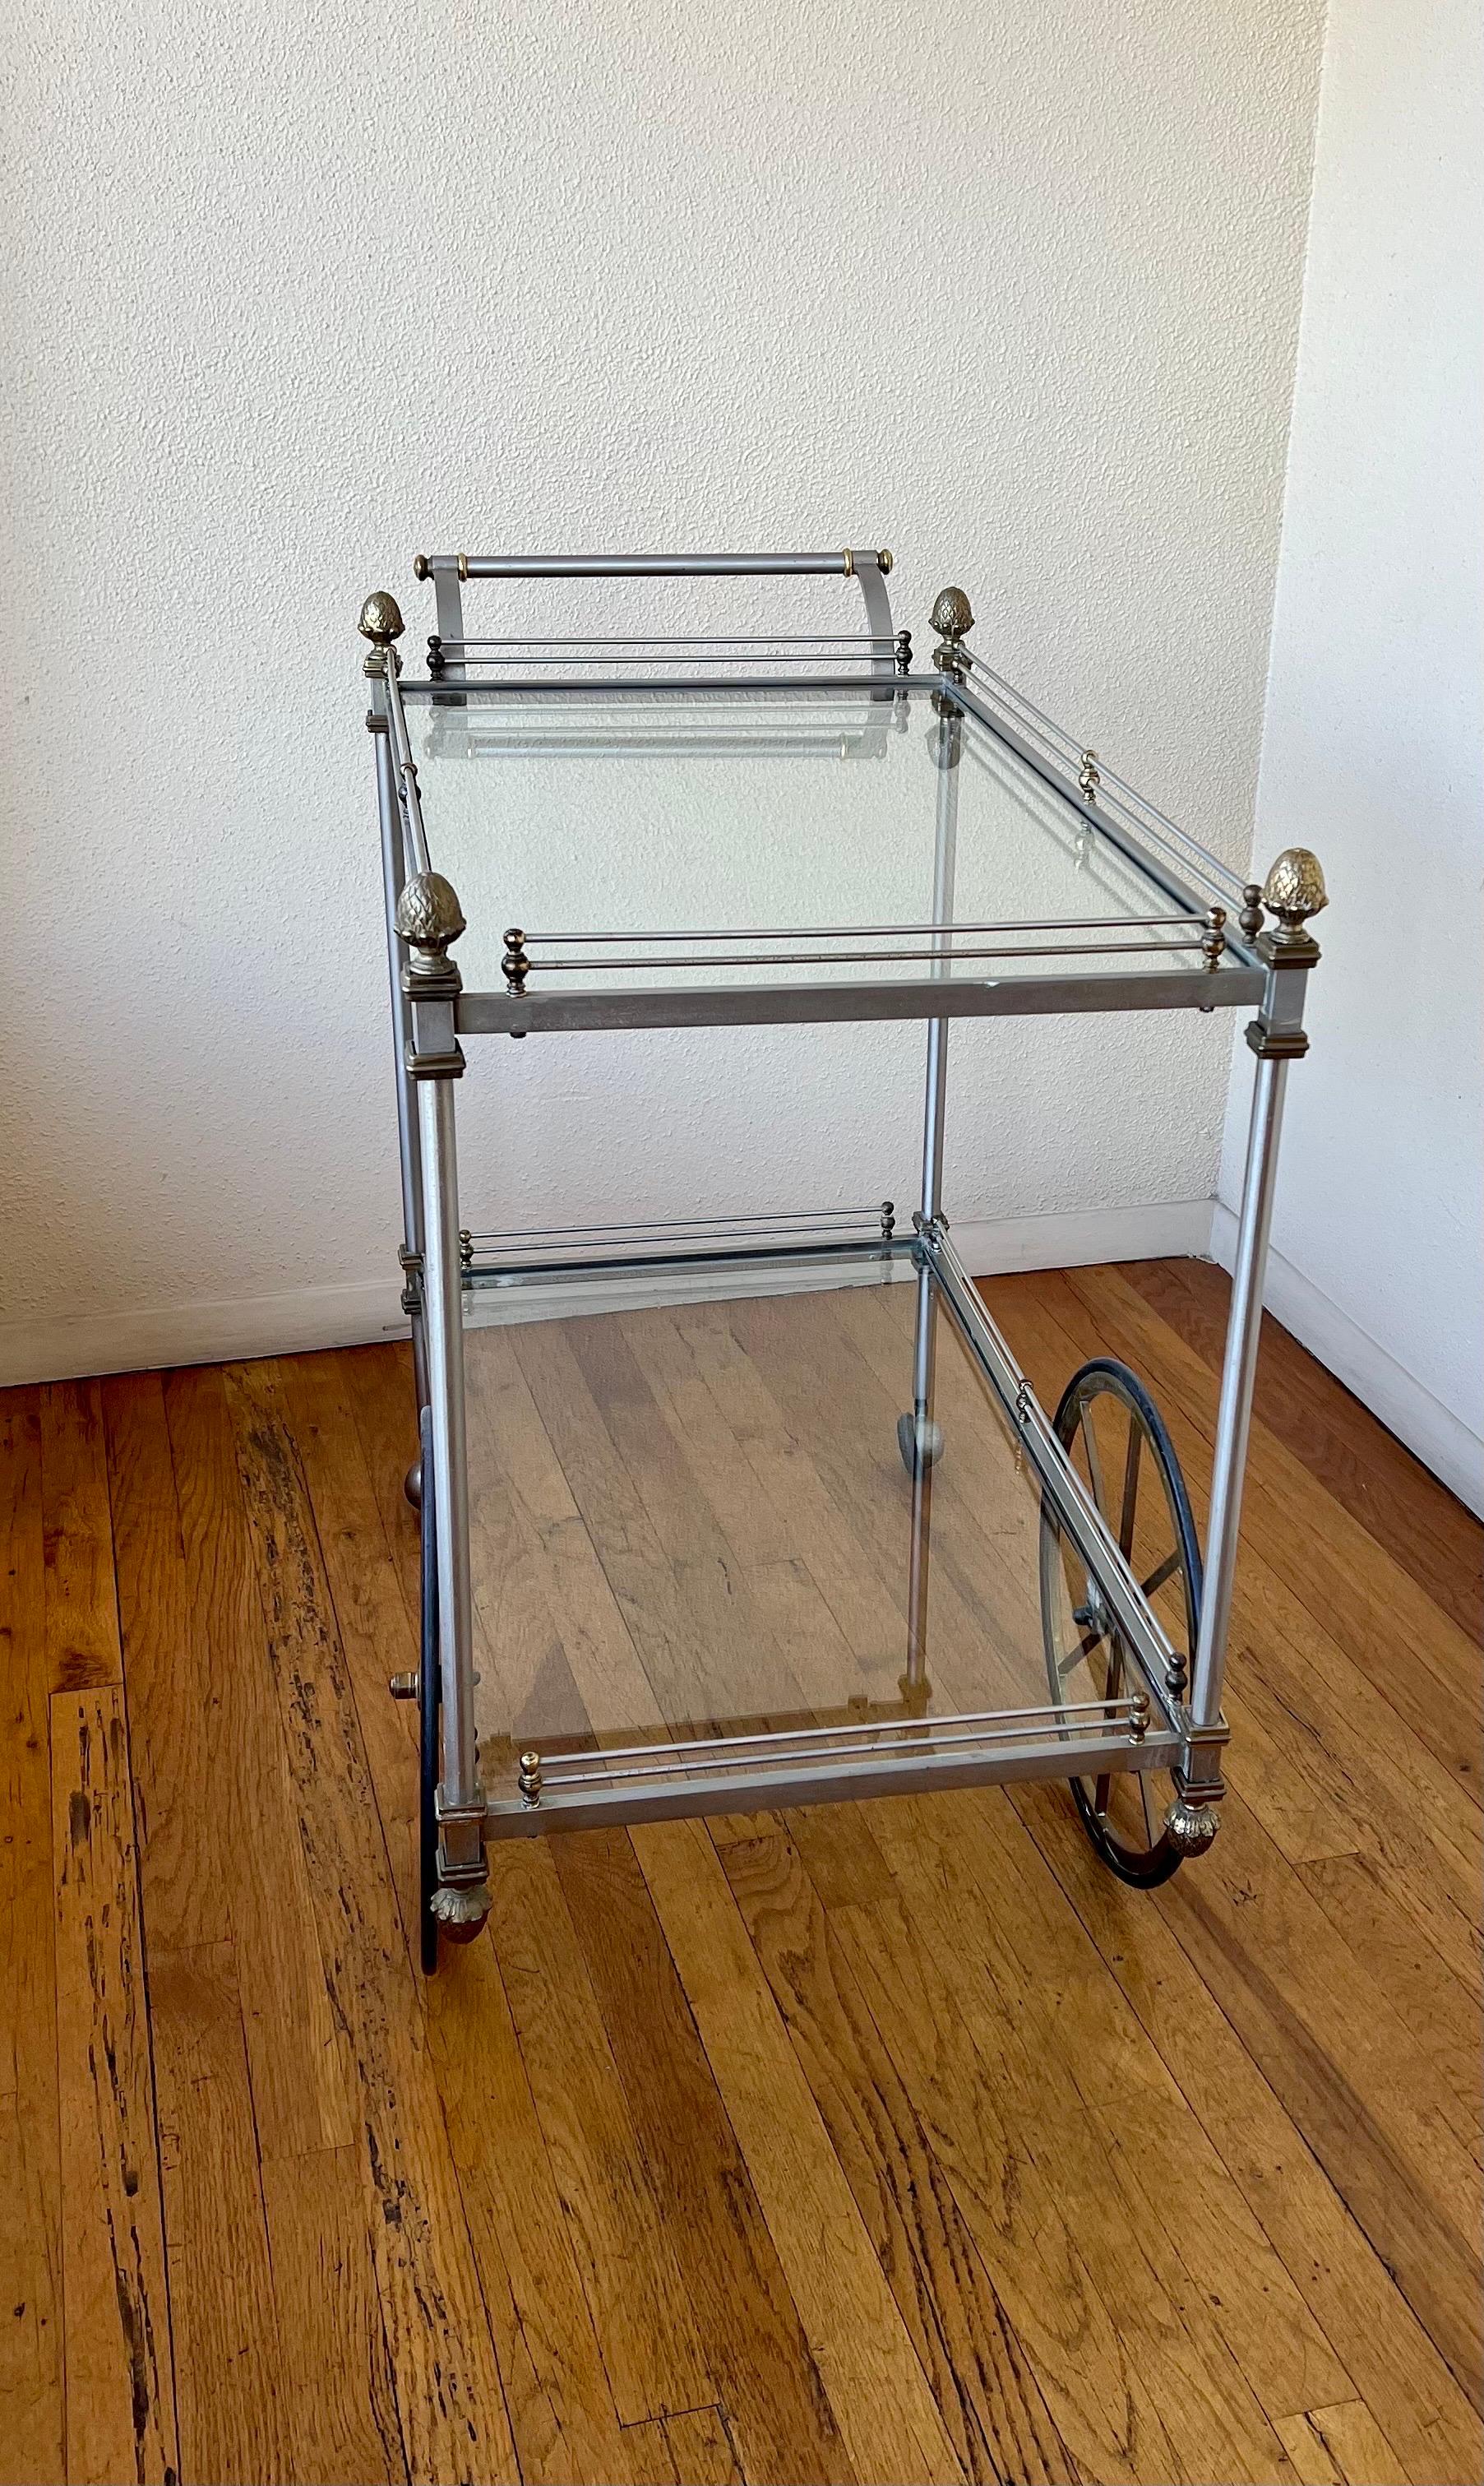 Maison Jansen two-tiered finely brushed steel and brass rolling bar cart trolley in overall beautifully aged original color patina. Campaign style that blends well with mid-century or Postmodern decor.